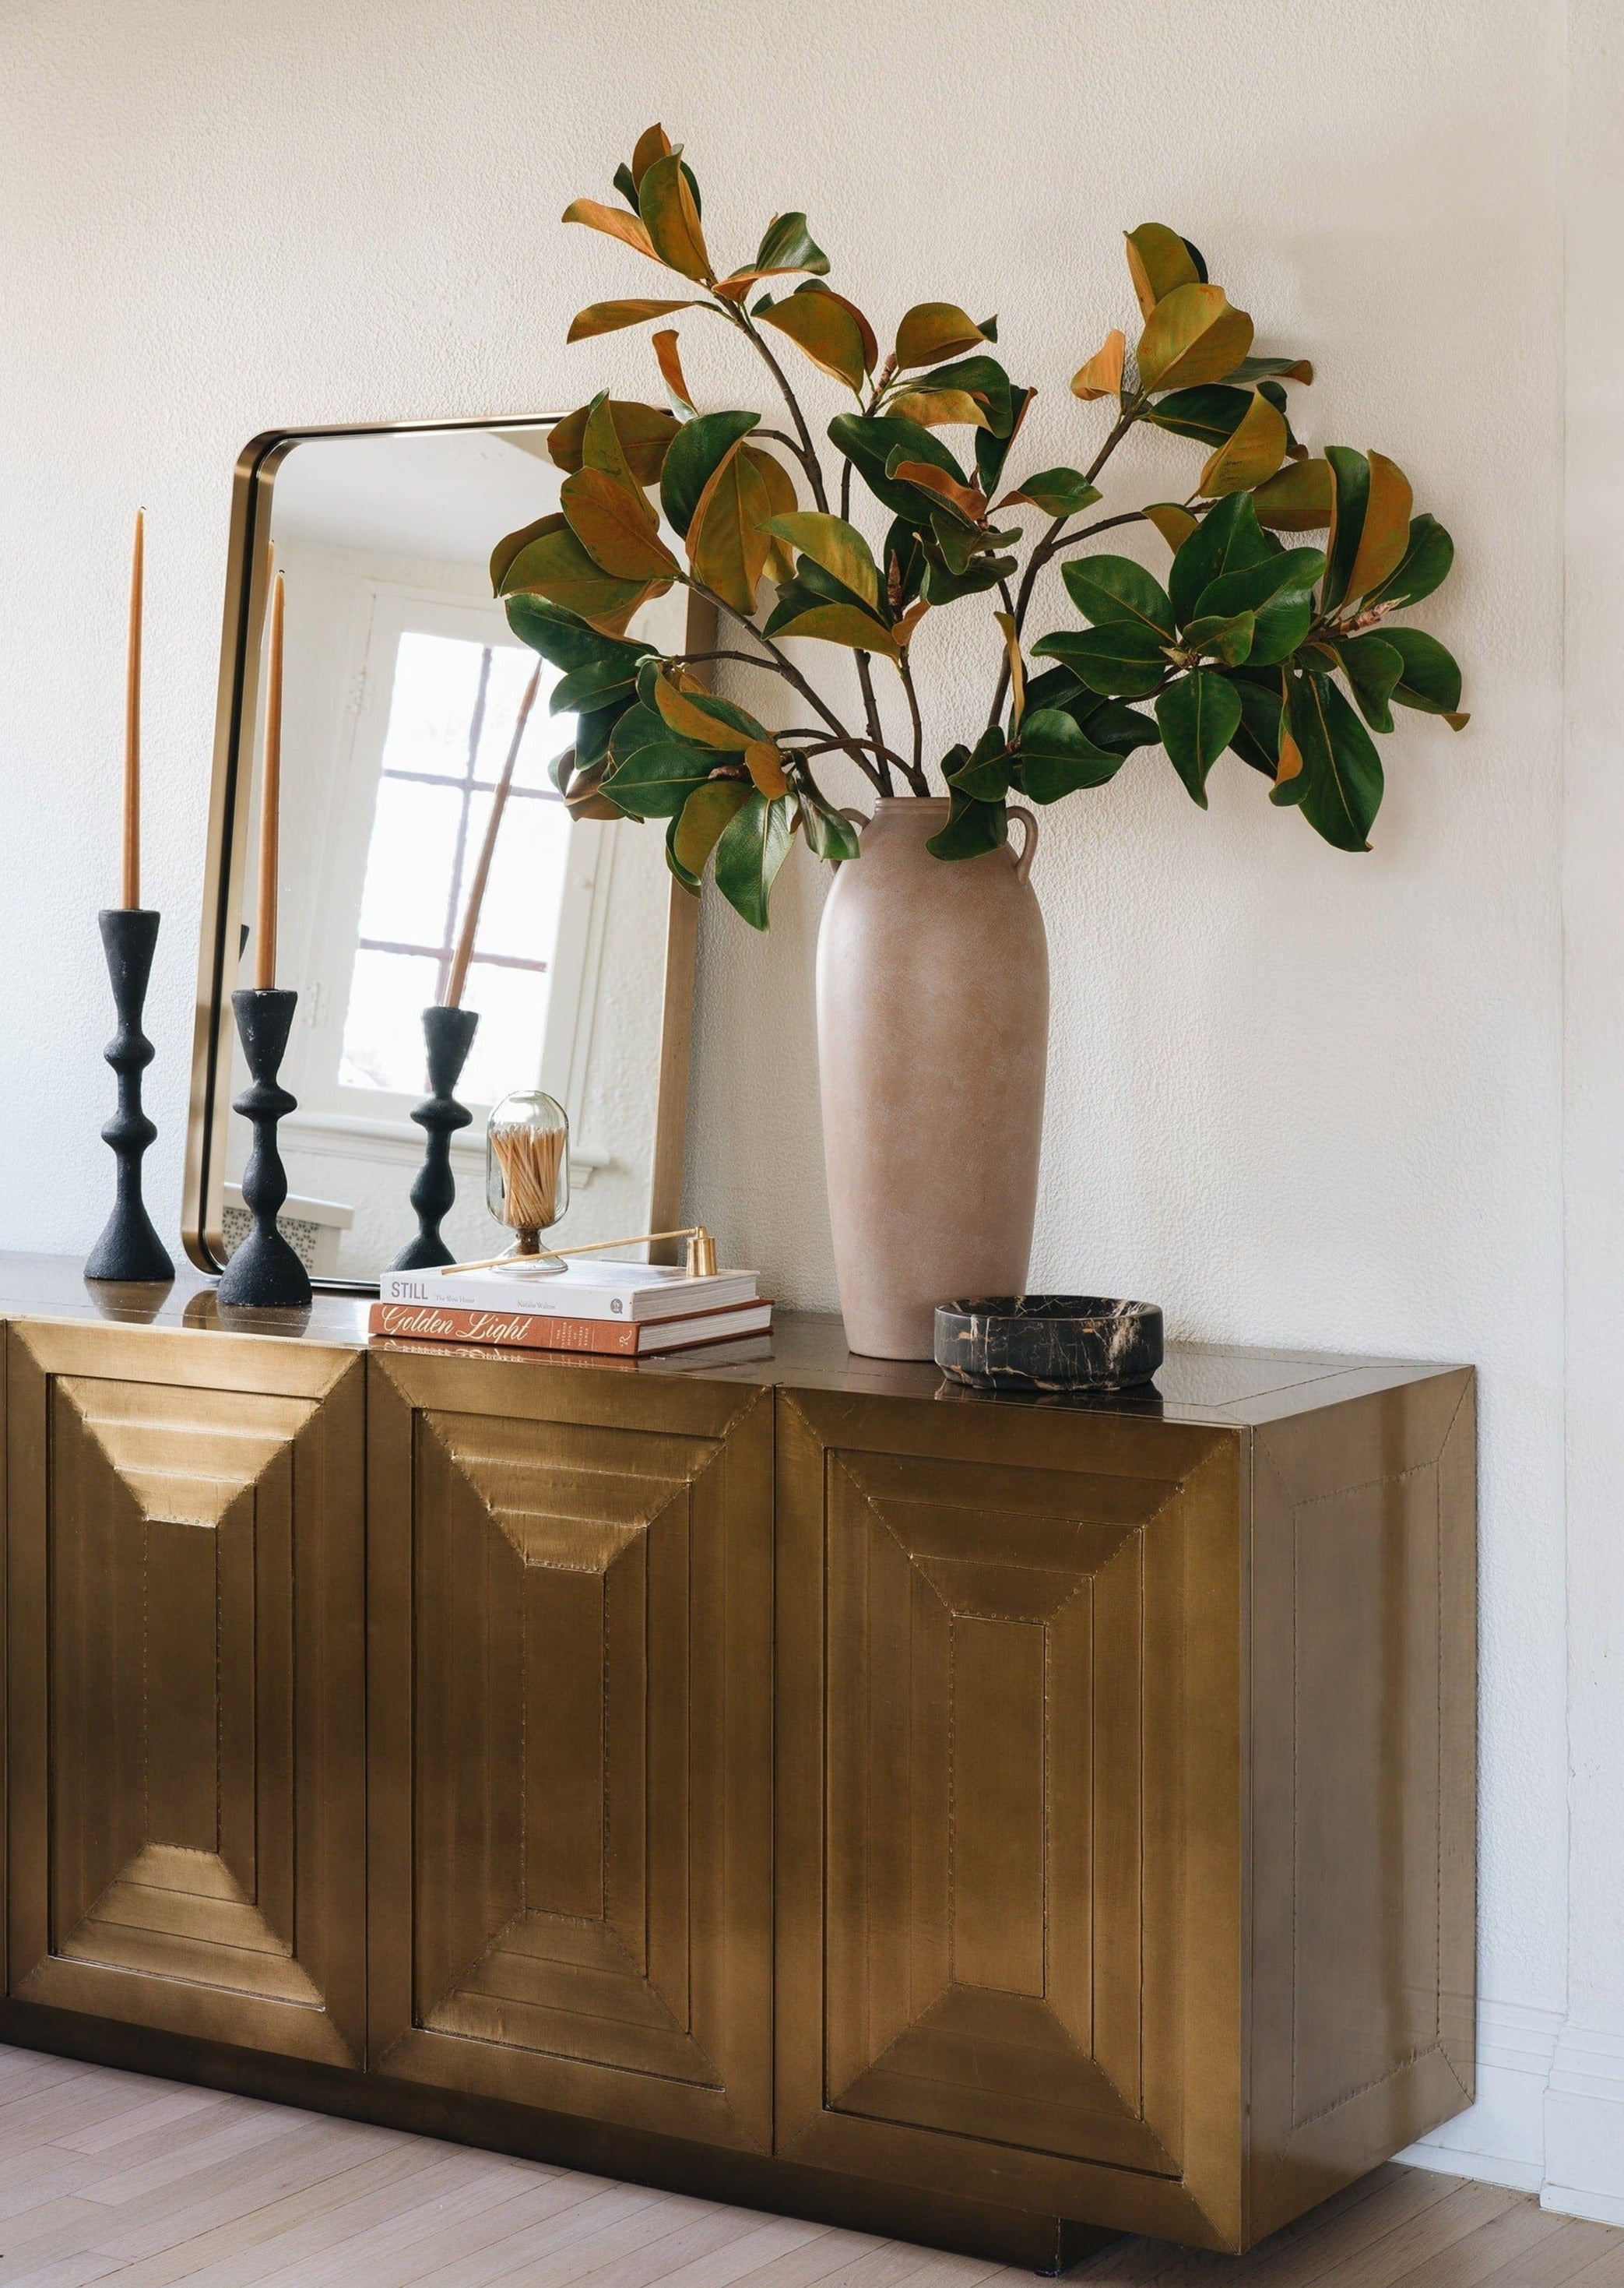 Faux Magnolia Branches in Tall Terracotta Vase